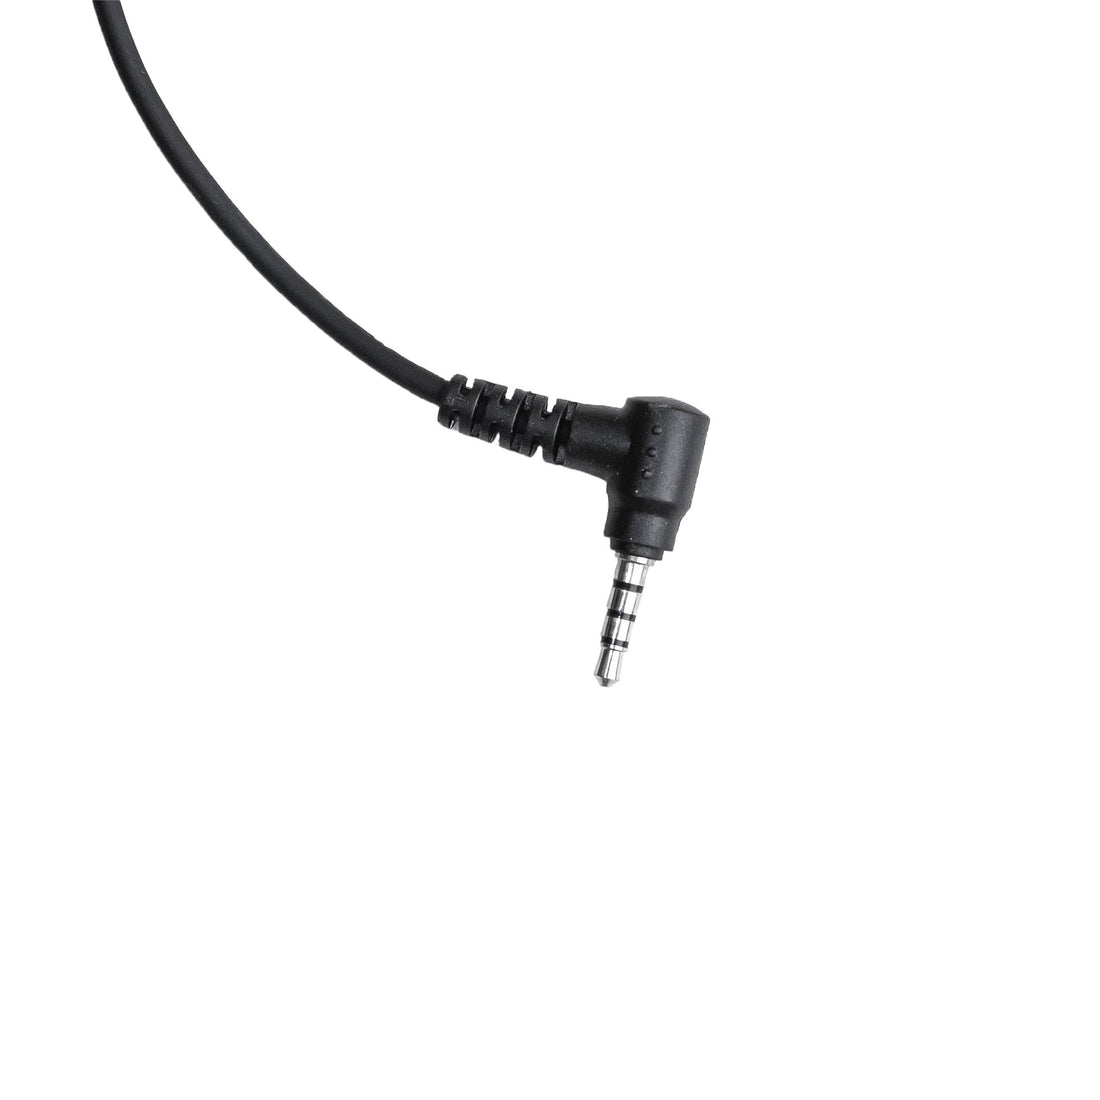 Air-Duct Earphone with 3.5mm plug